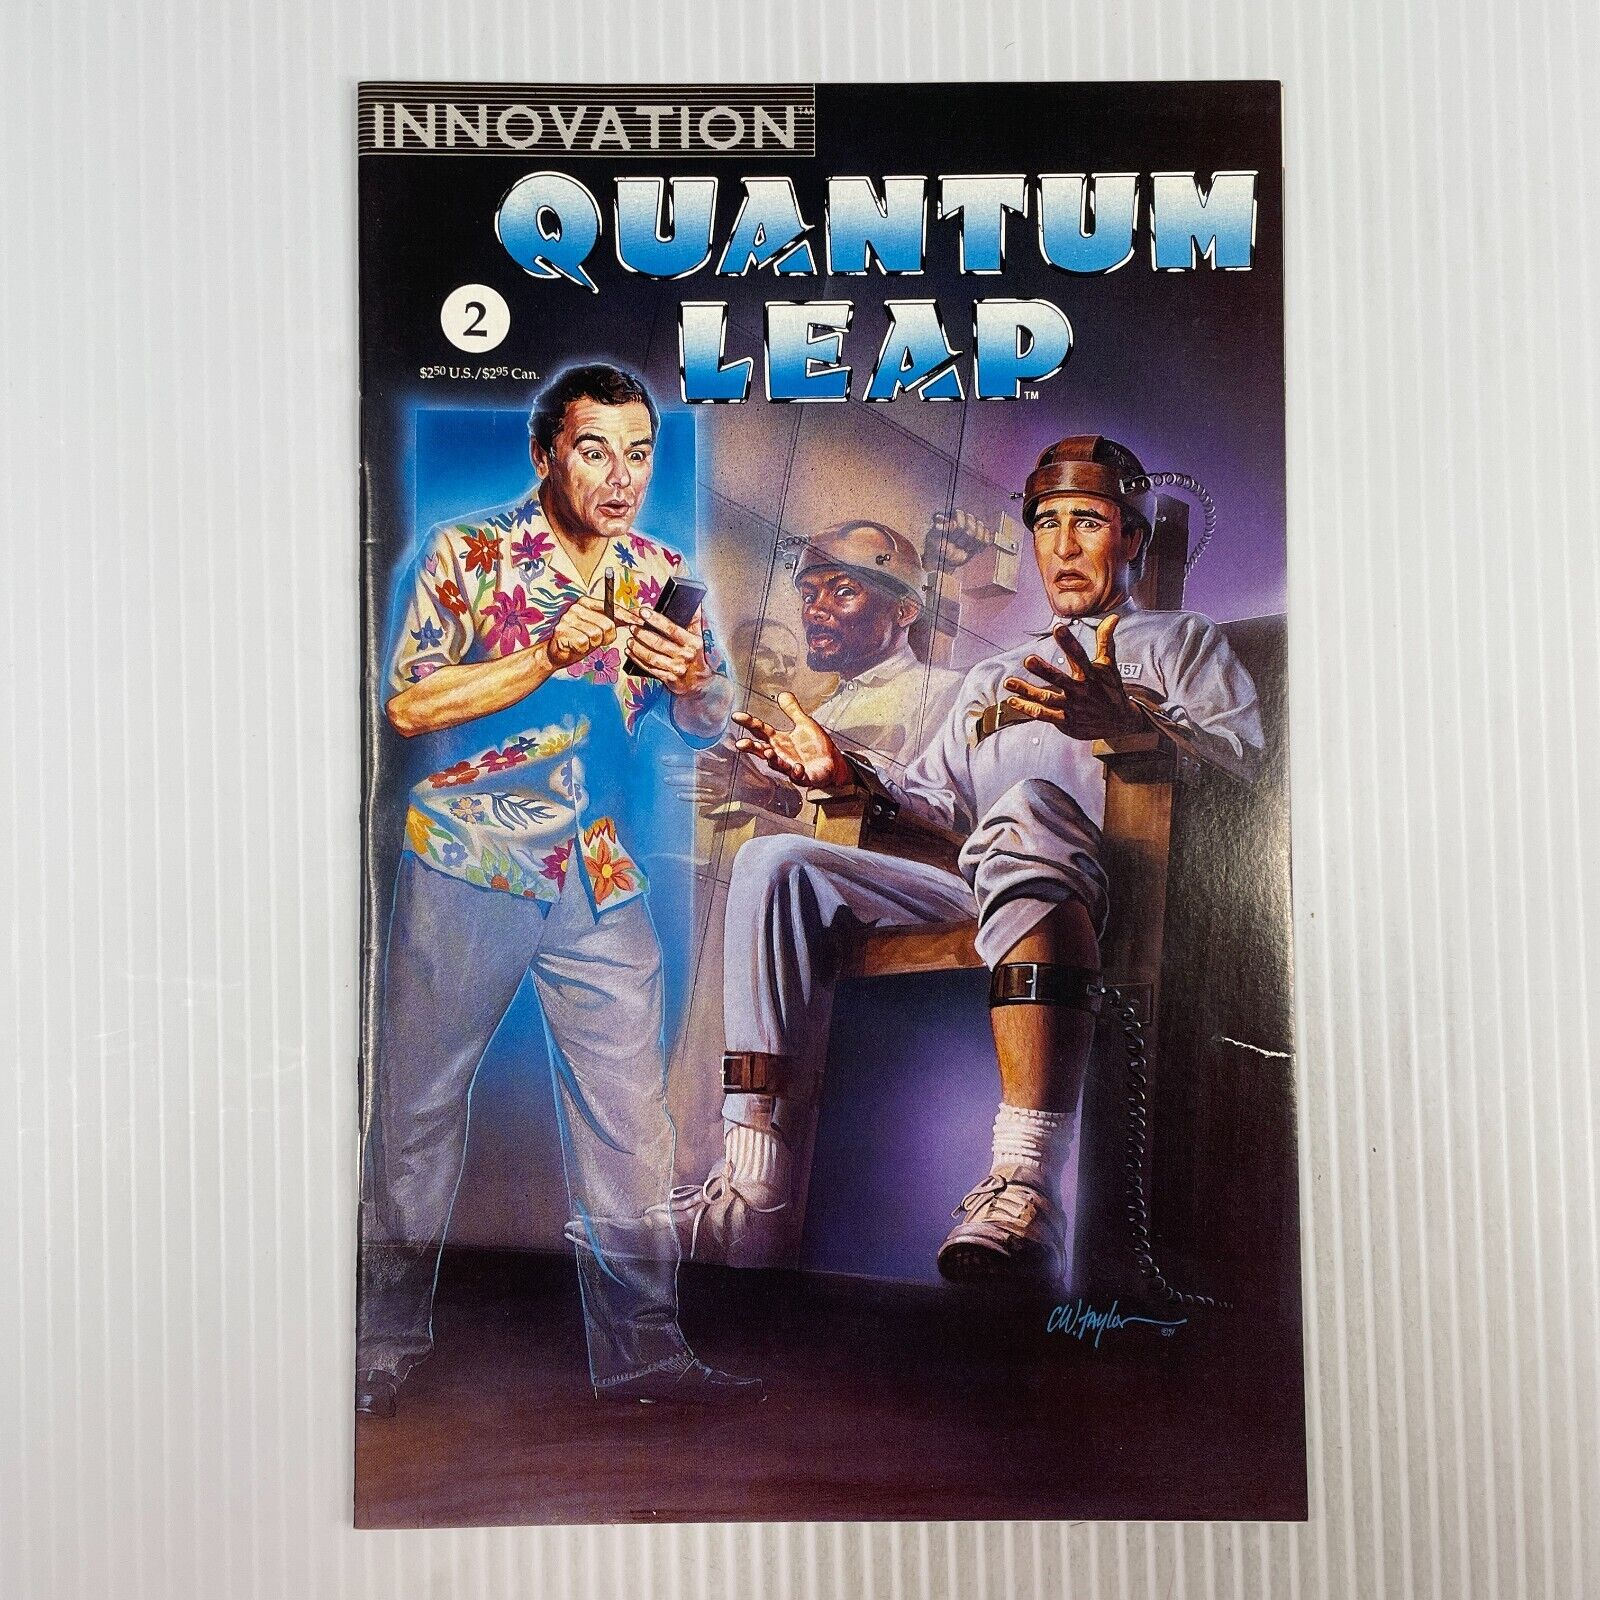 Quantum Leap (Innovation Comics, 1991-1993) - Pick Your Issue